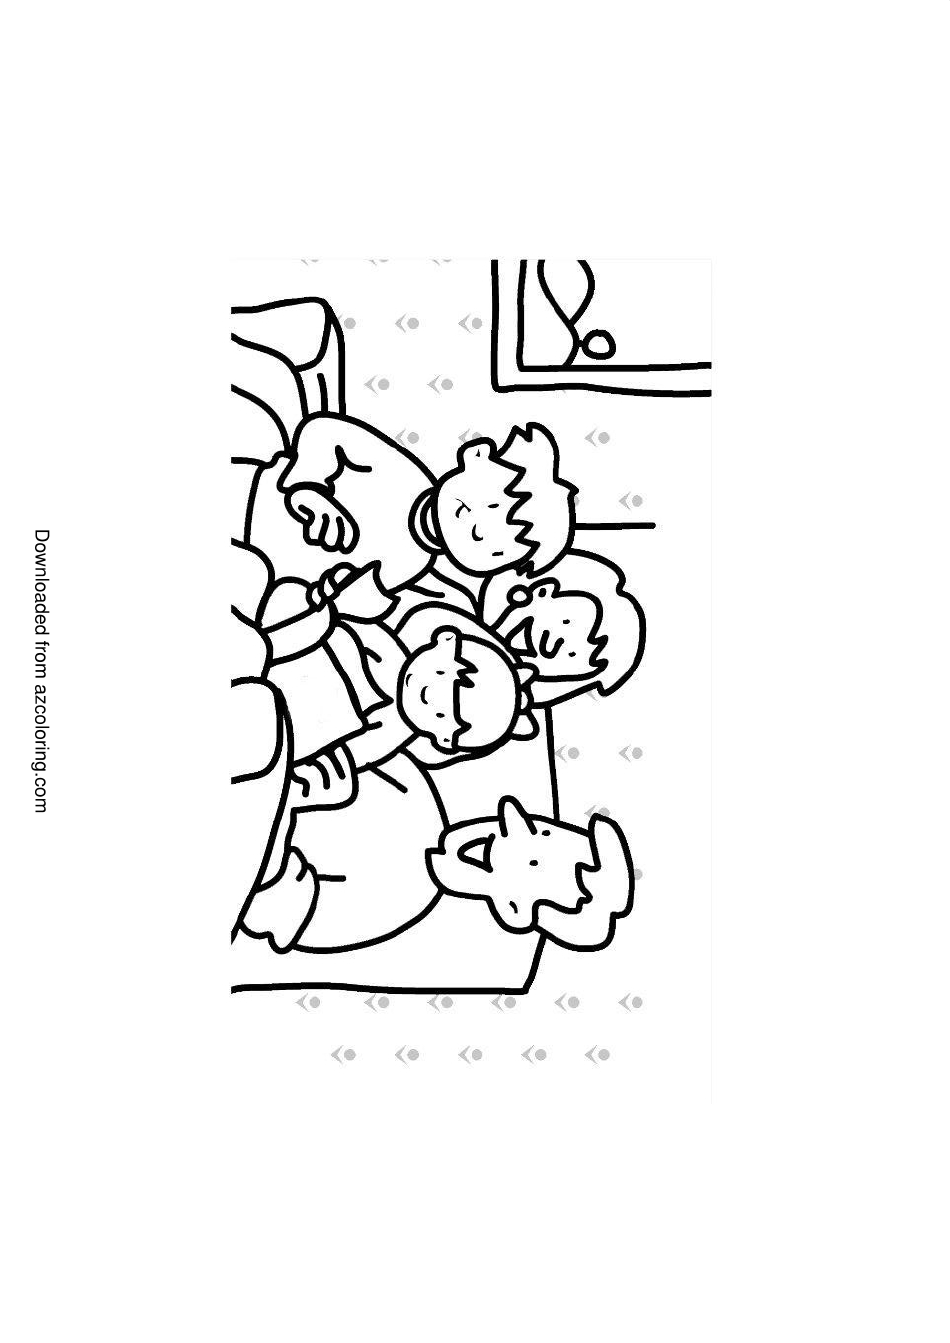 Family Evening Coloring Page - Fun and Creative Activity for the Whole Family